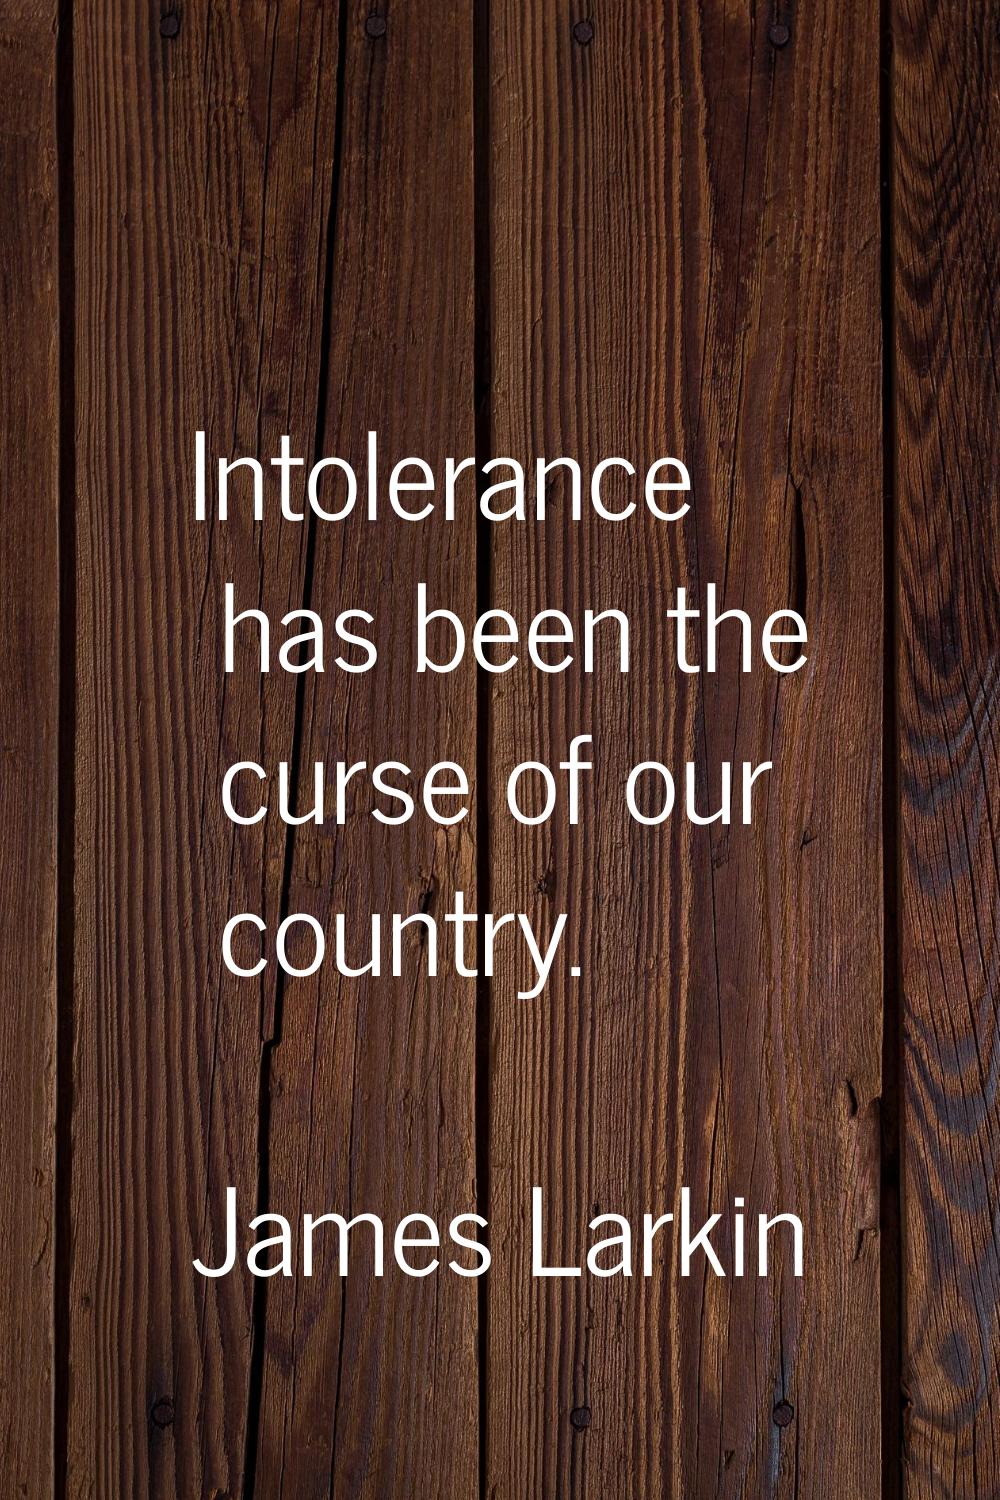 Intolerance has been the curse of our country.